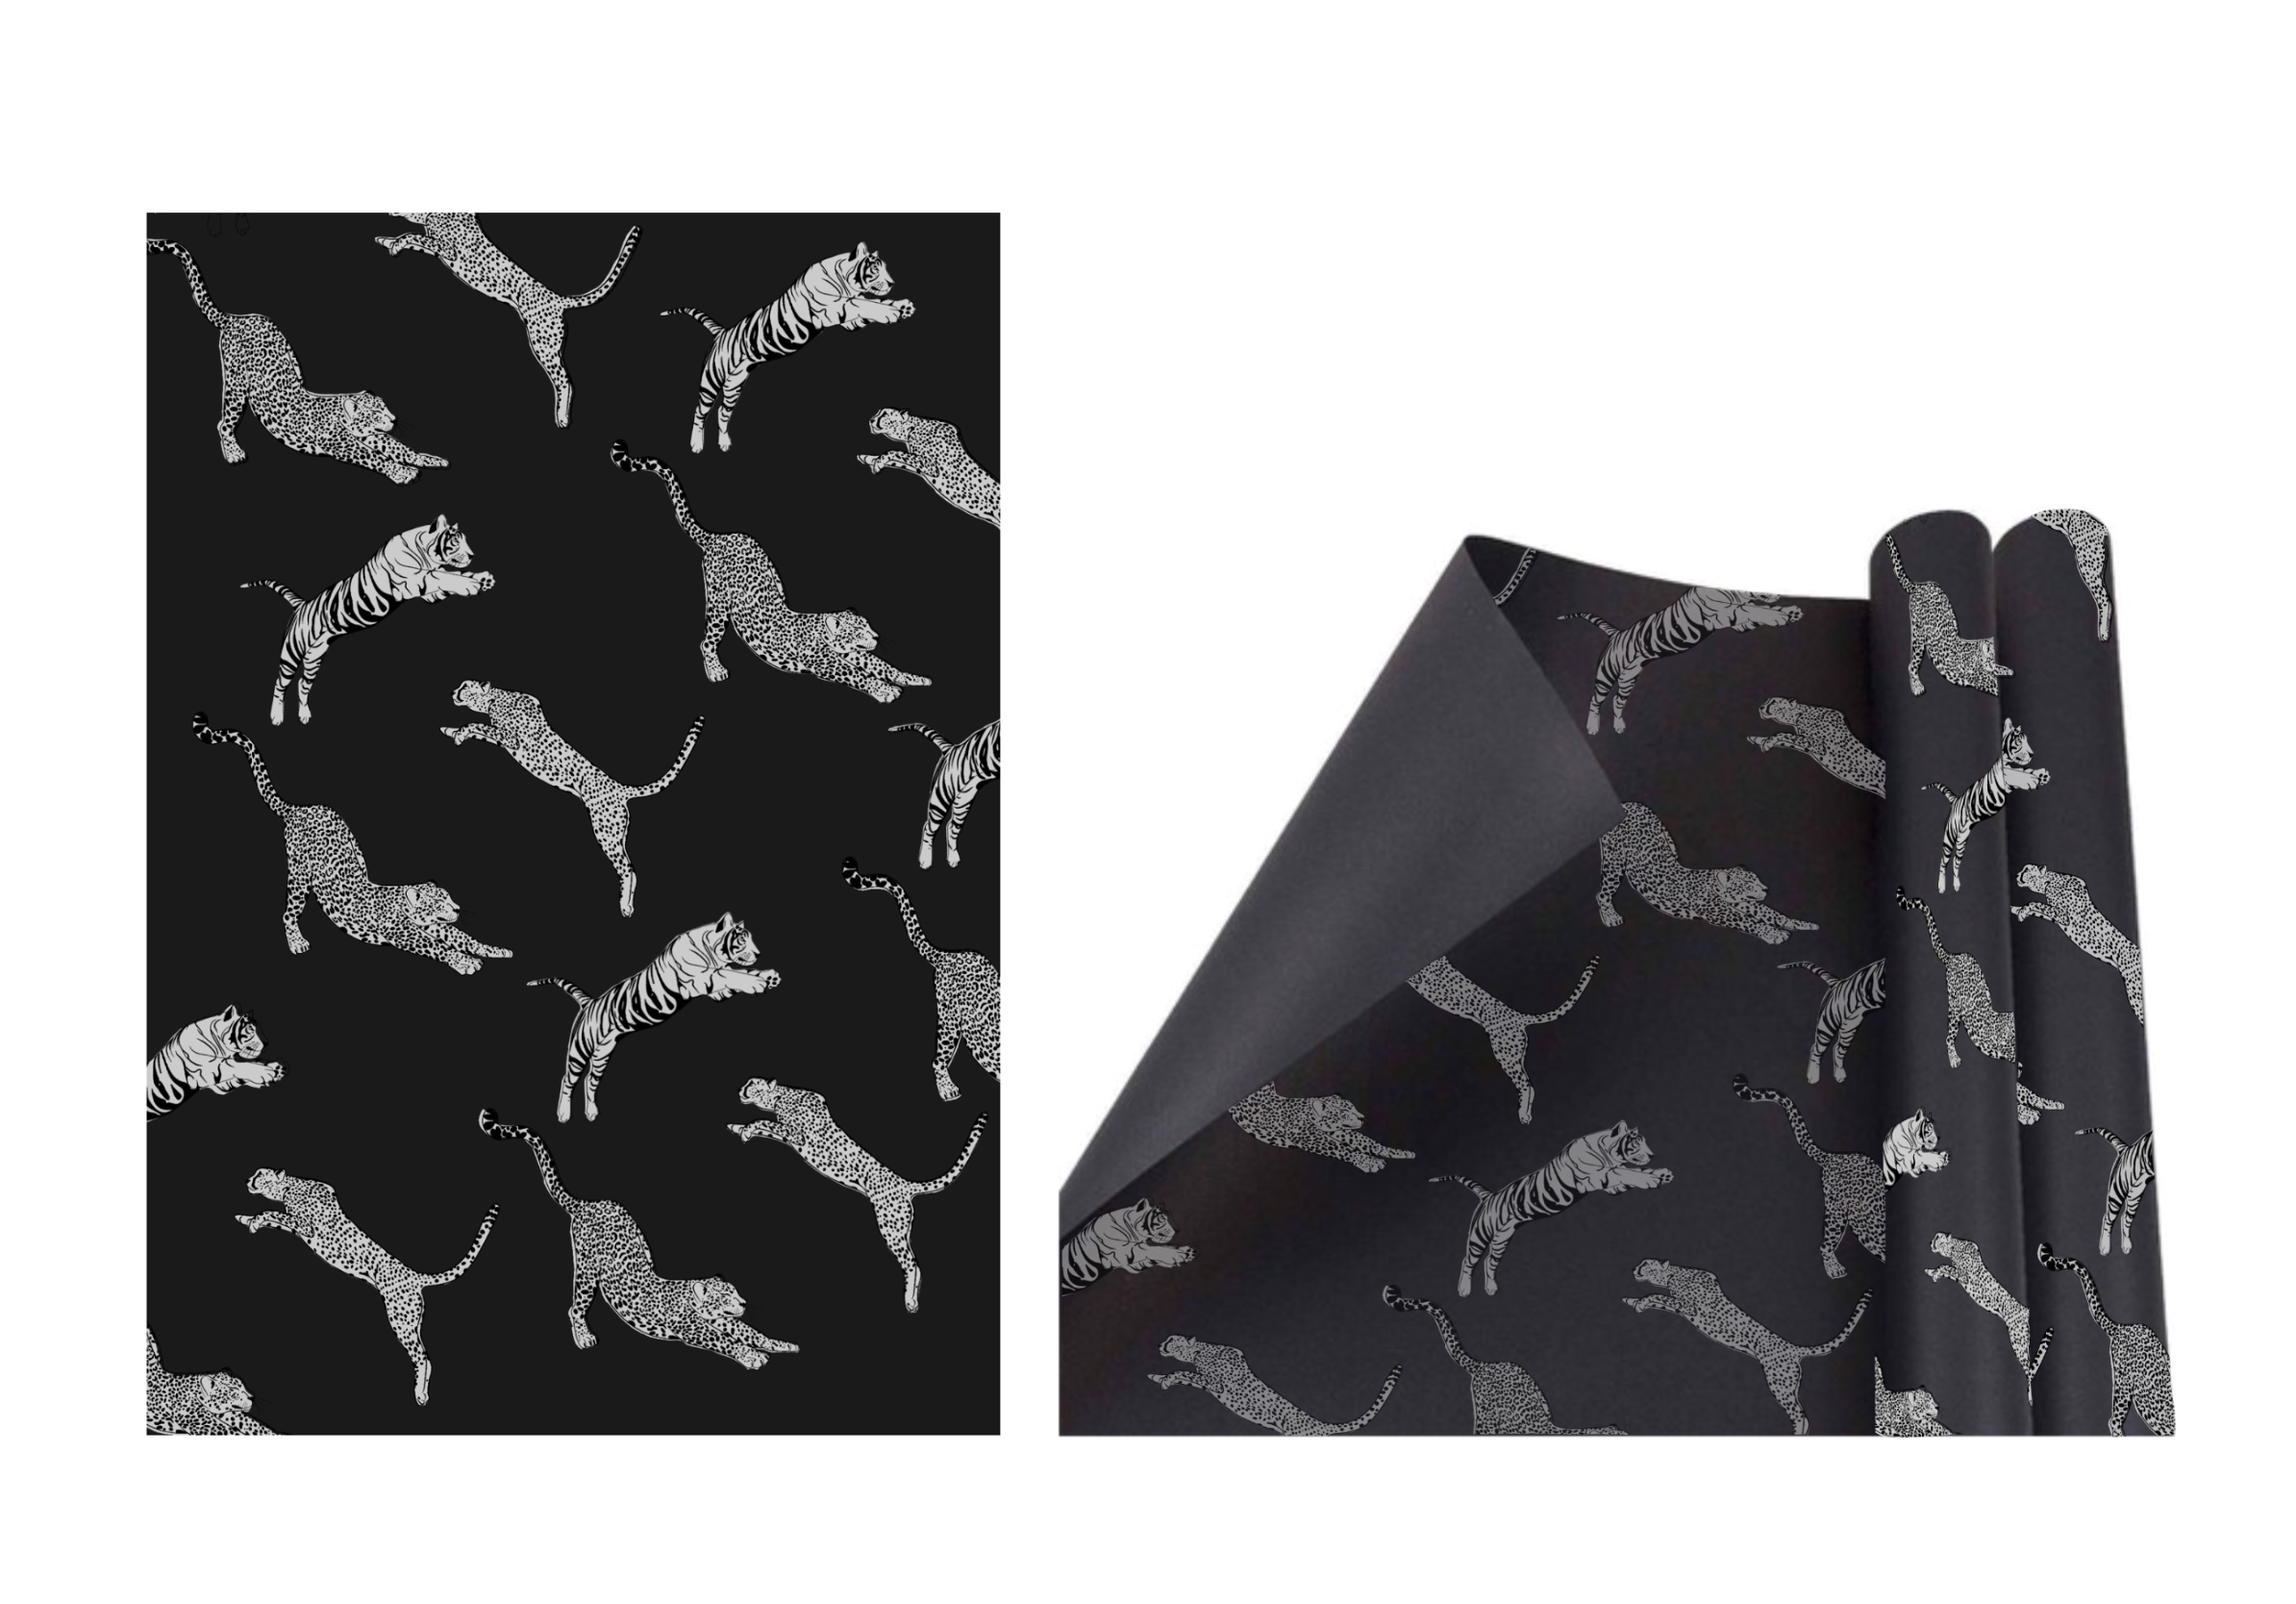 Illustration work by Mia Sains showing black and white wallpaper design filled with leopards and tigers